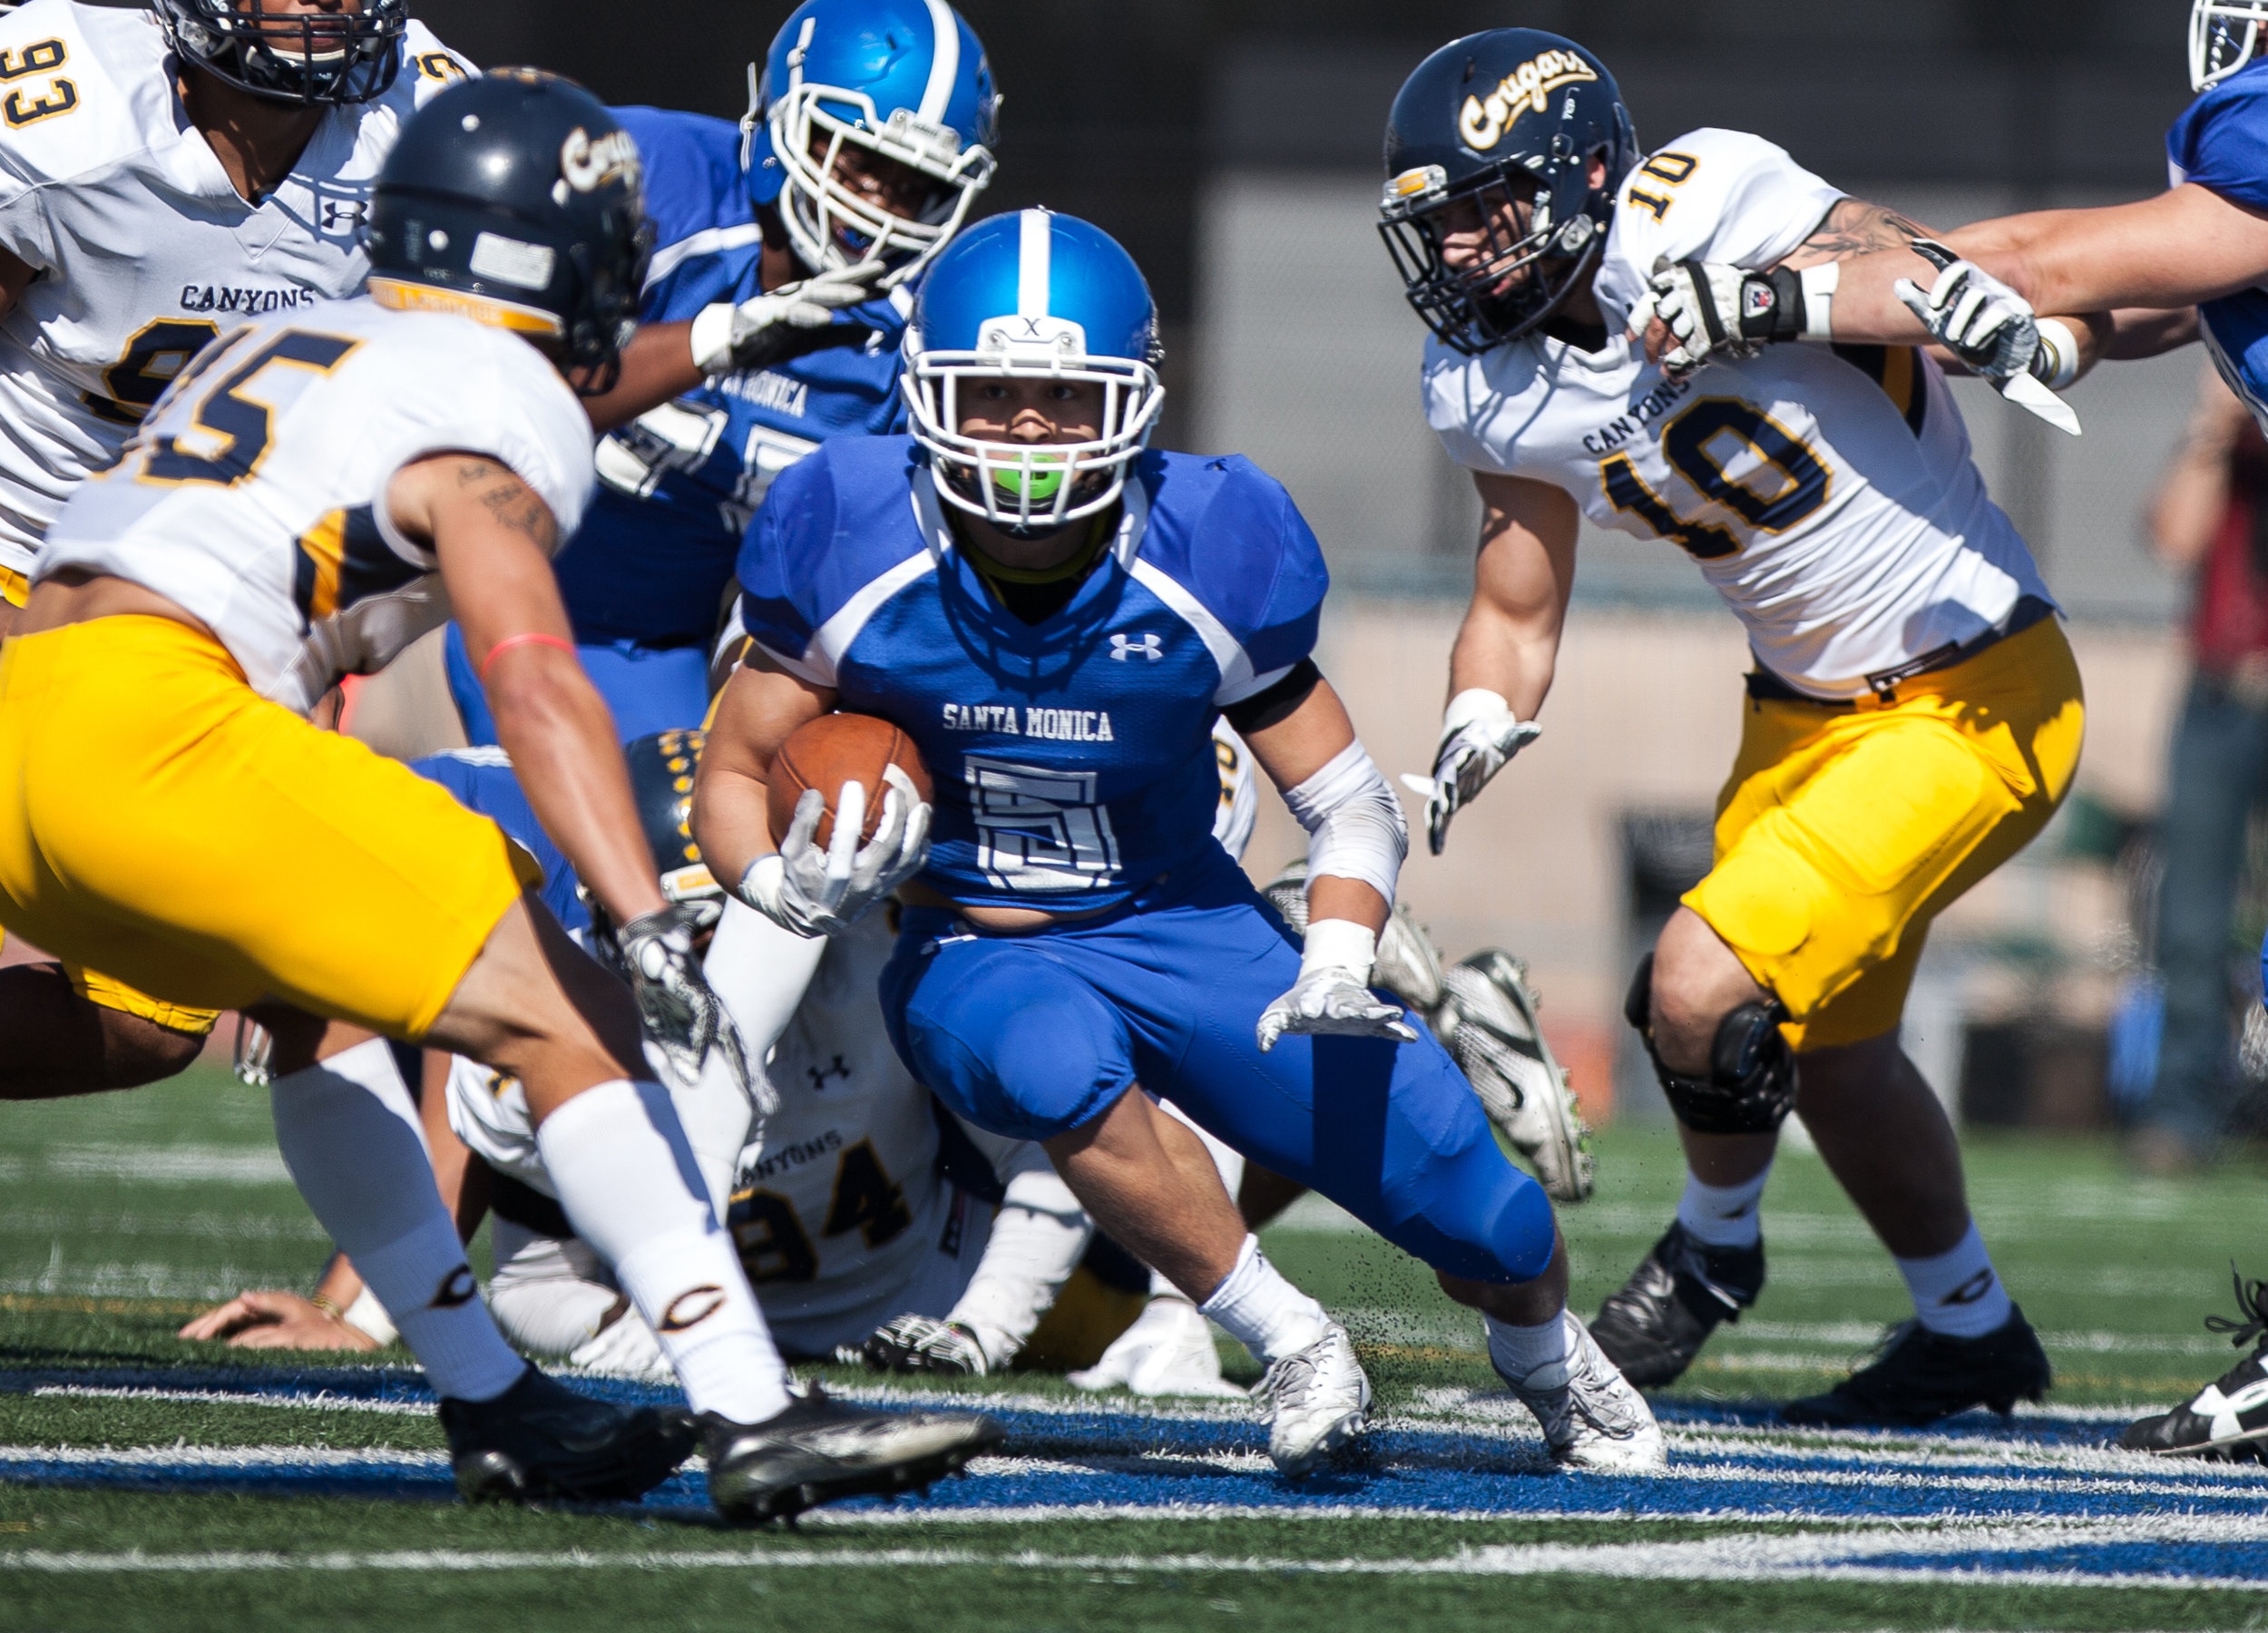  Christoph Hirota (5) of the Santa Monica College handles the ball.  College of the Canyons beat the Corsairs 48-7. The game was held at the Corsair Stadium at the Santa Monica College Main Campus in Santa Monica, California, on 4th of November, 2017